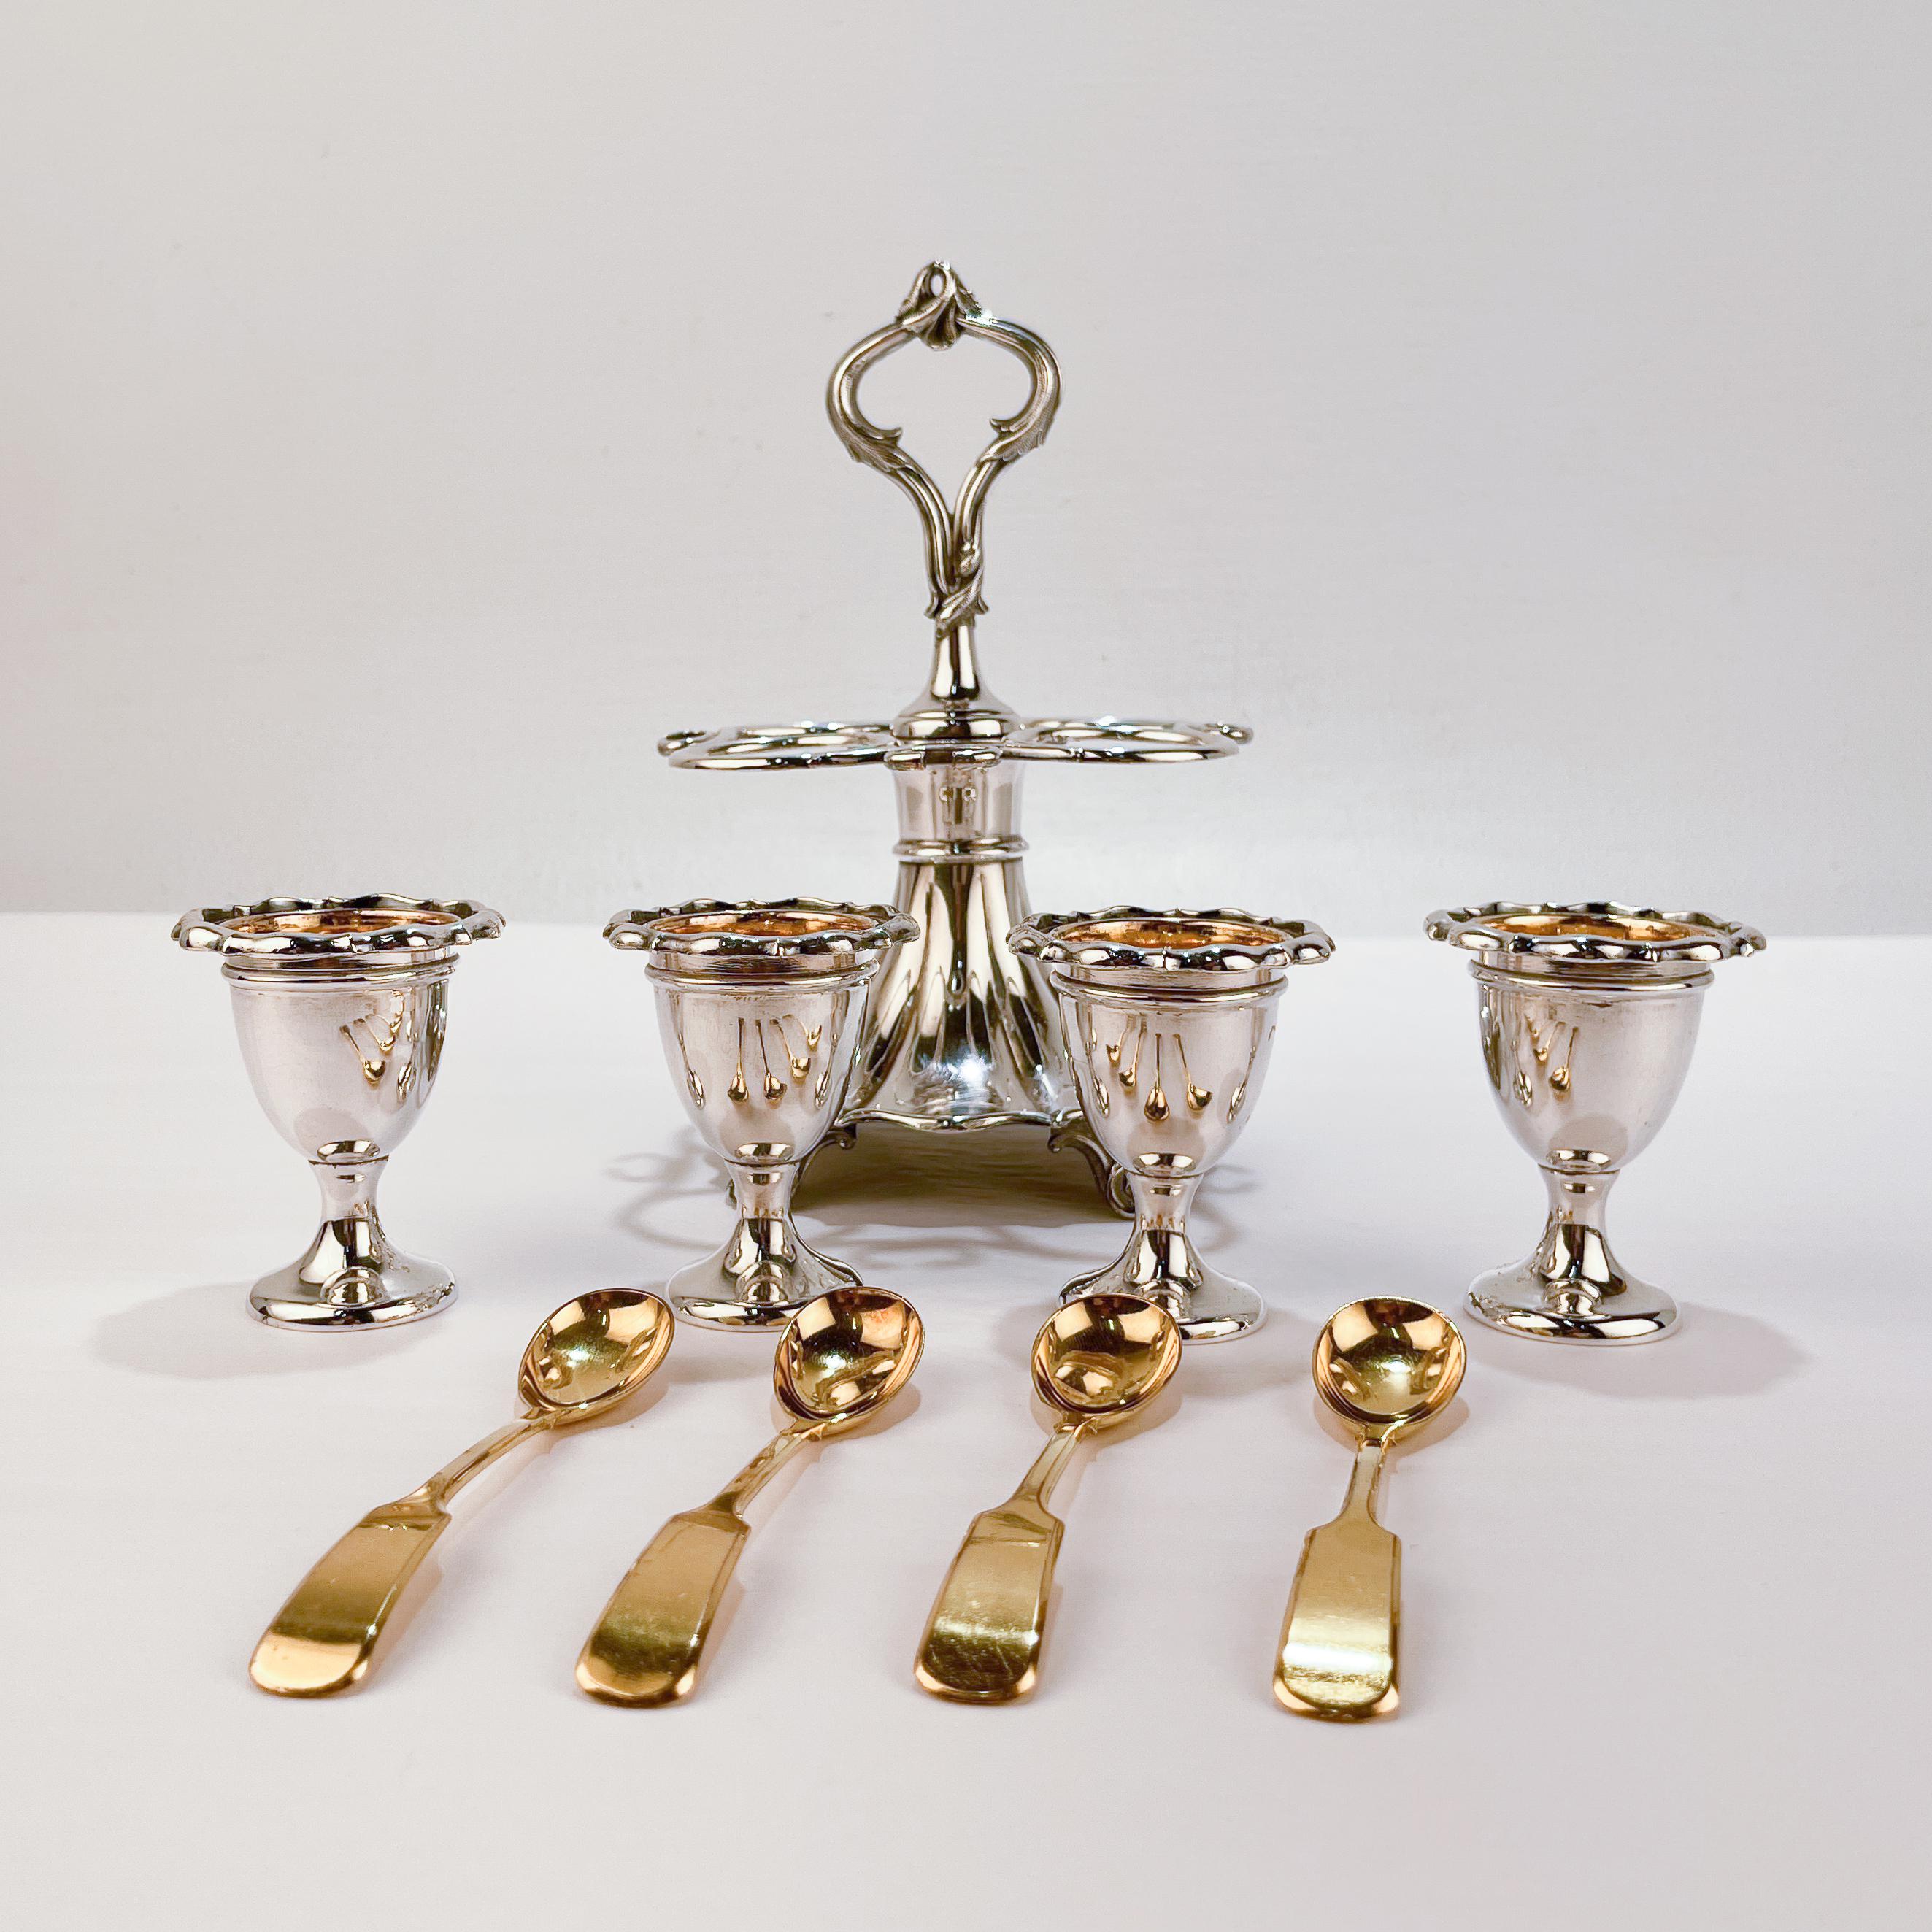 Antique 19th Century English Silver Plated Egg Cups and Stand For Sale 4